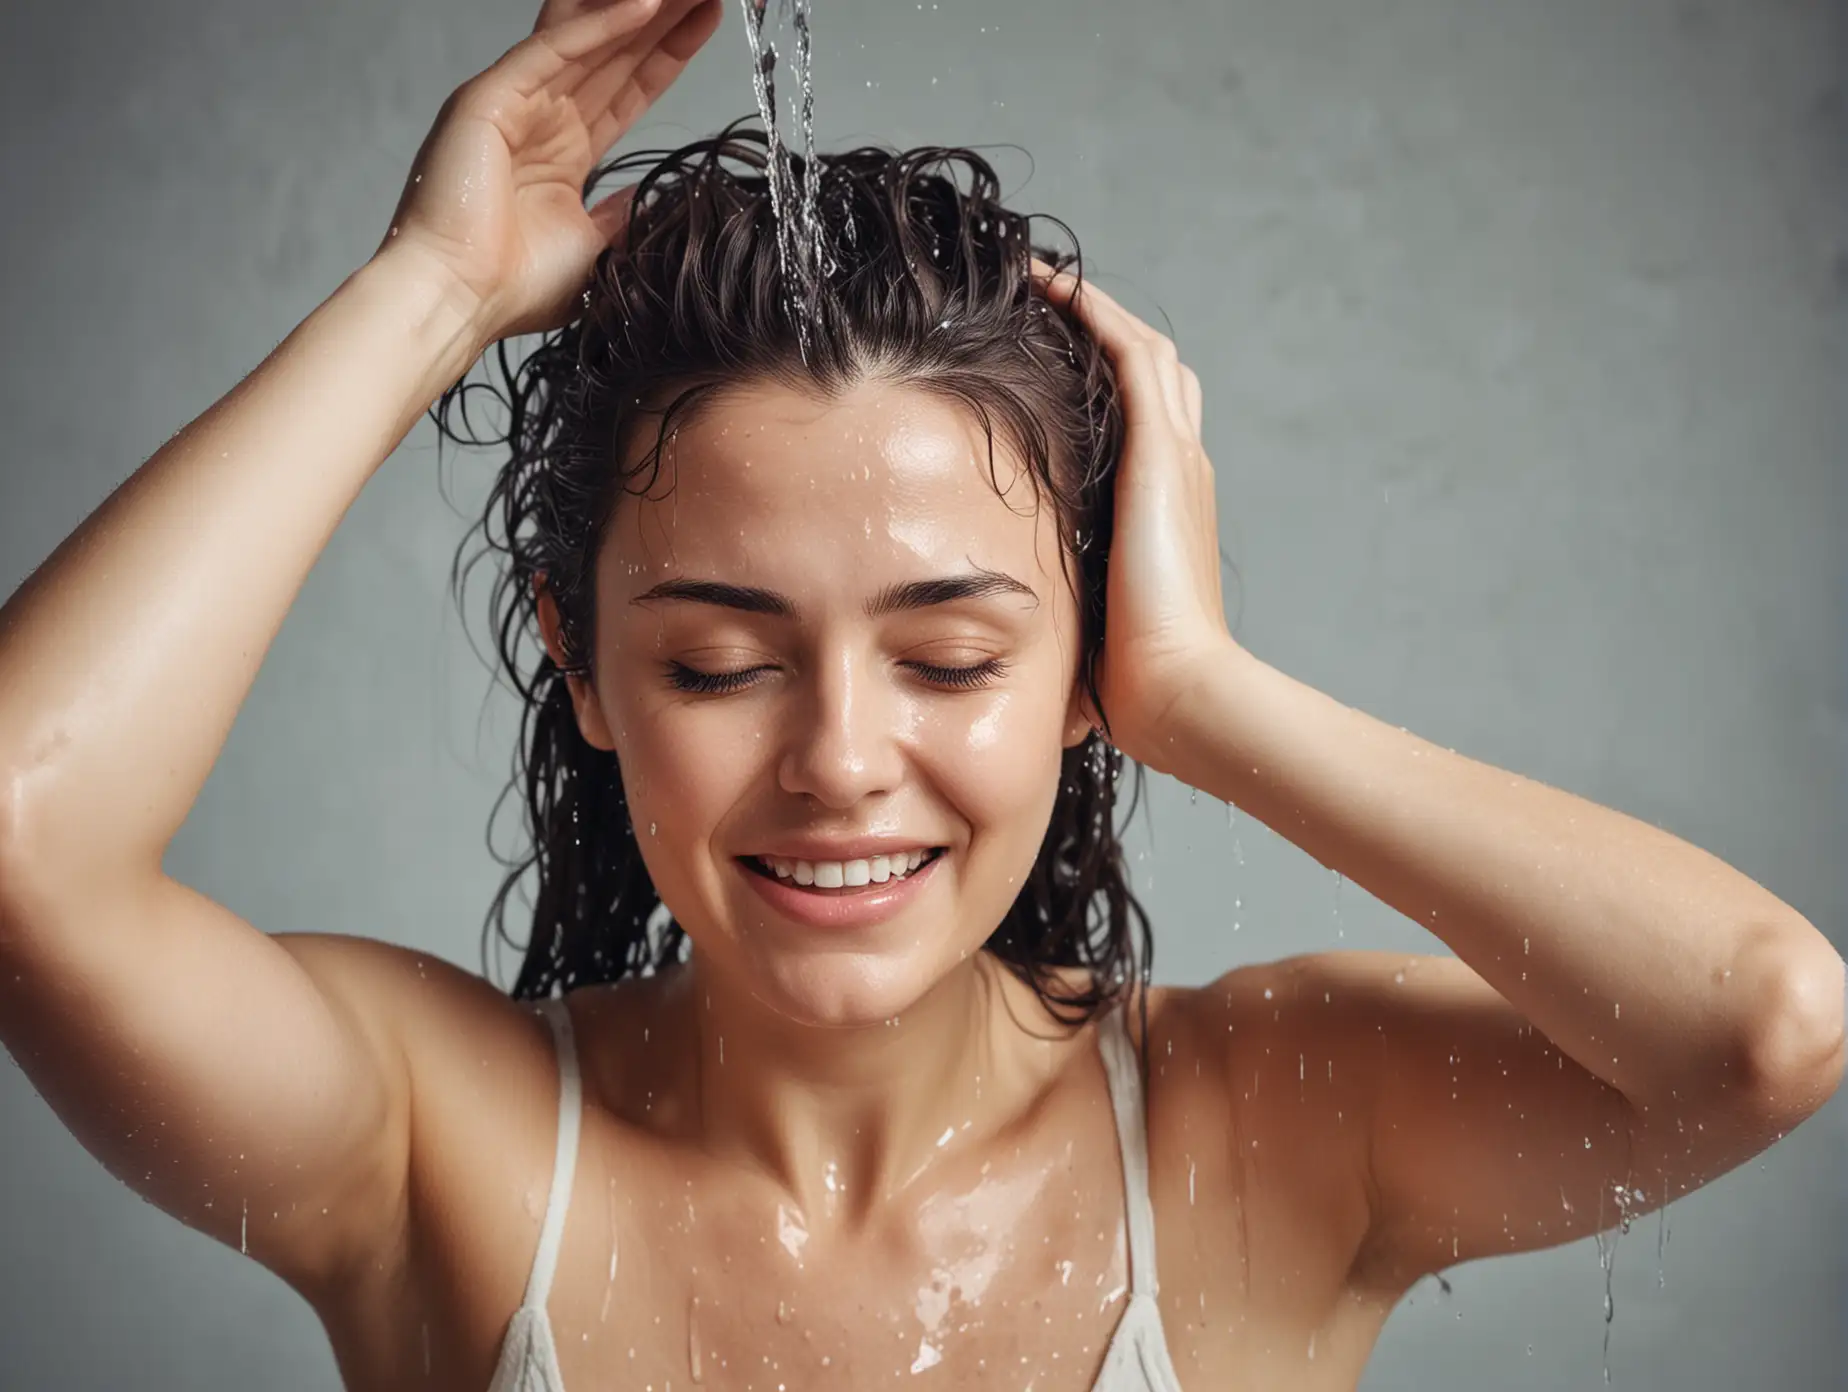 a woman pouring water on her own head, dripping wet hair